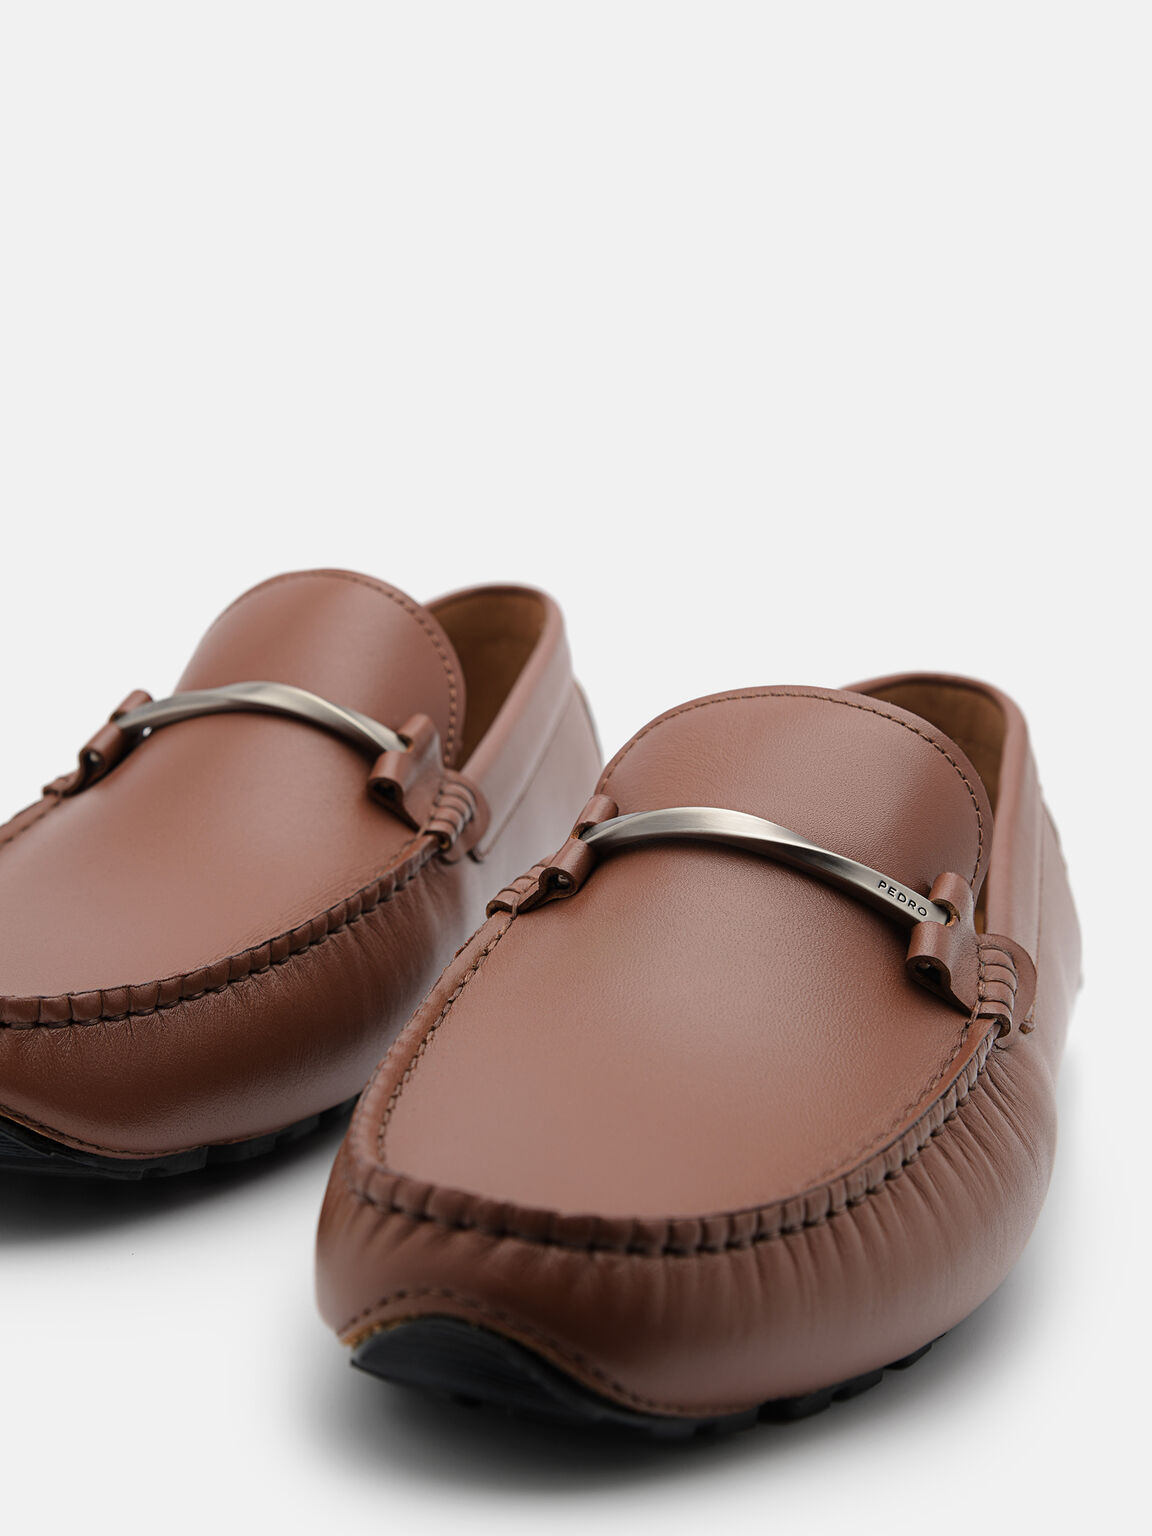 Leather Horsebit Moccasins, Brown